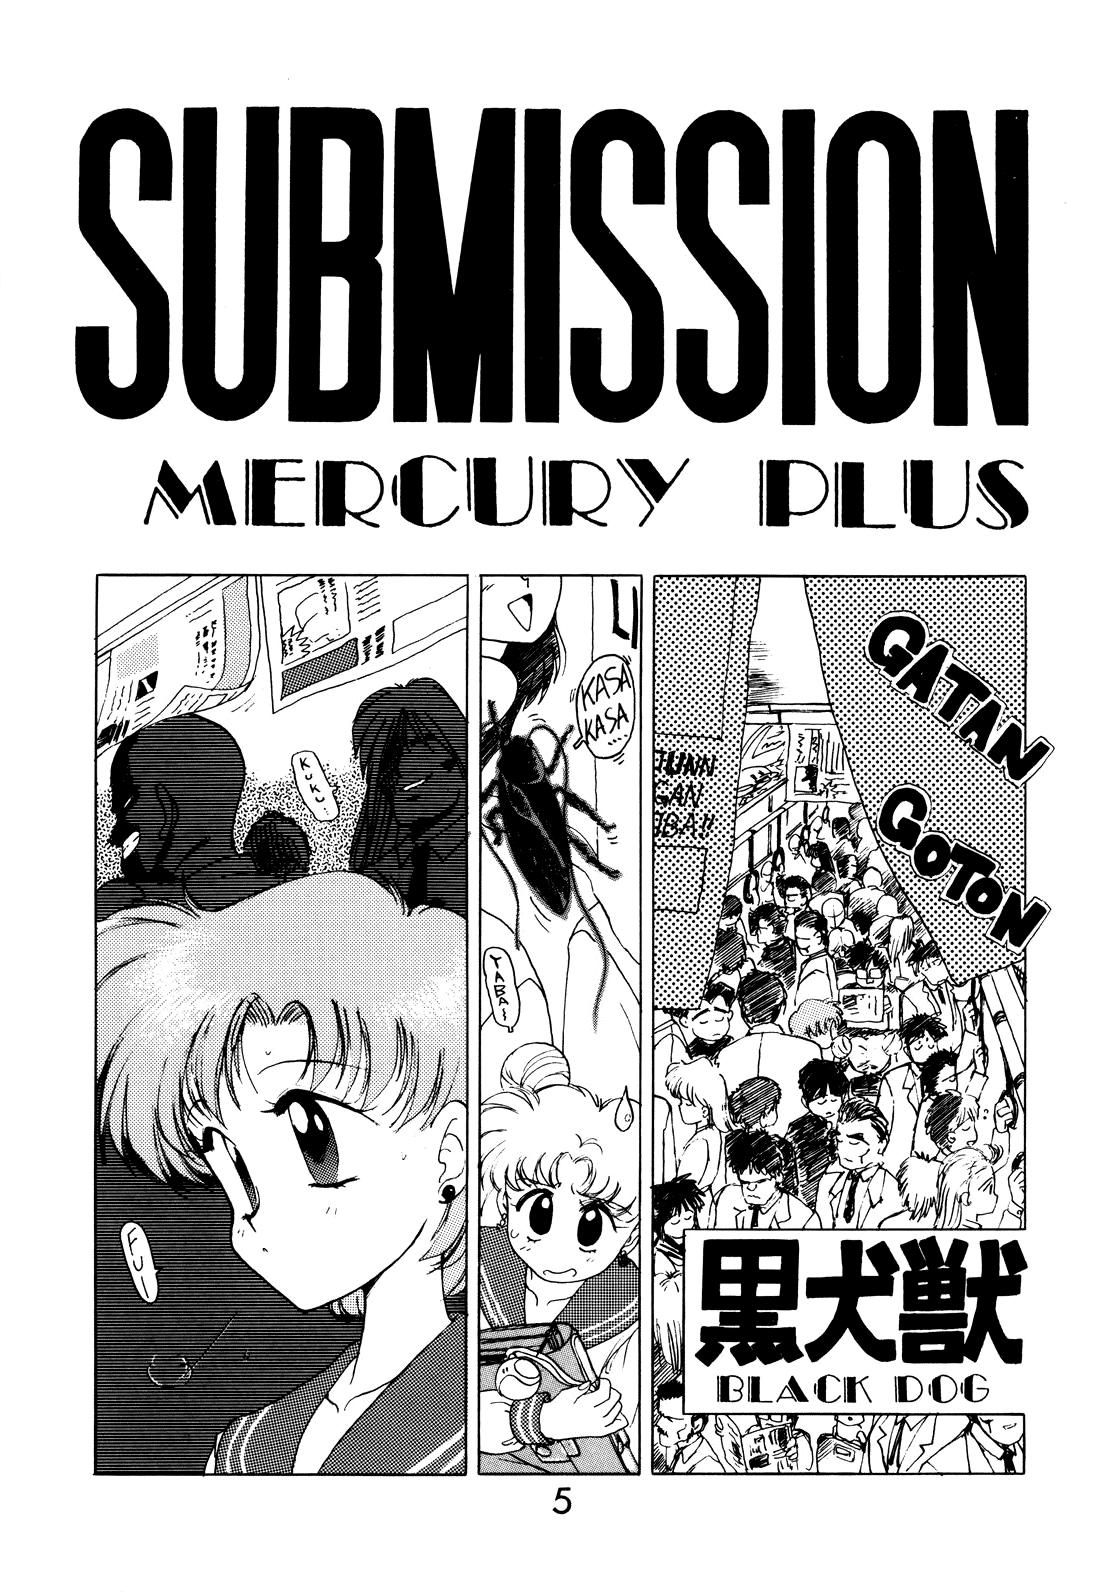 Straight Porn Submission Mercury Plus - Sailor moon Emo - Page 4